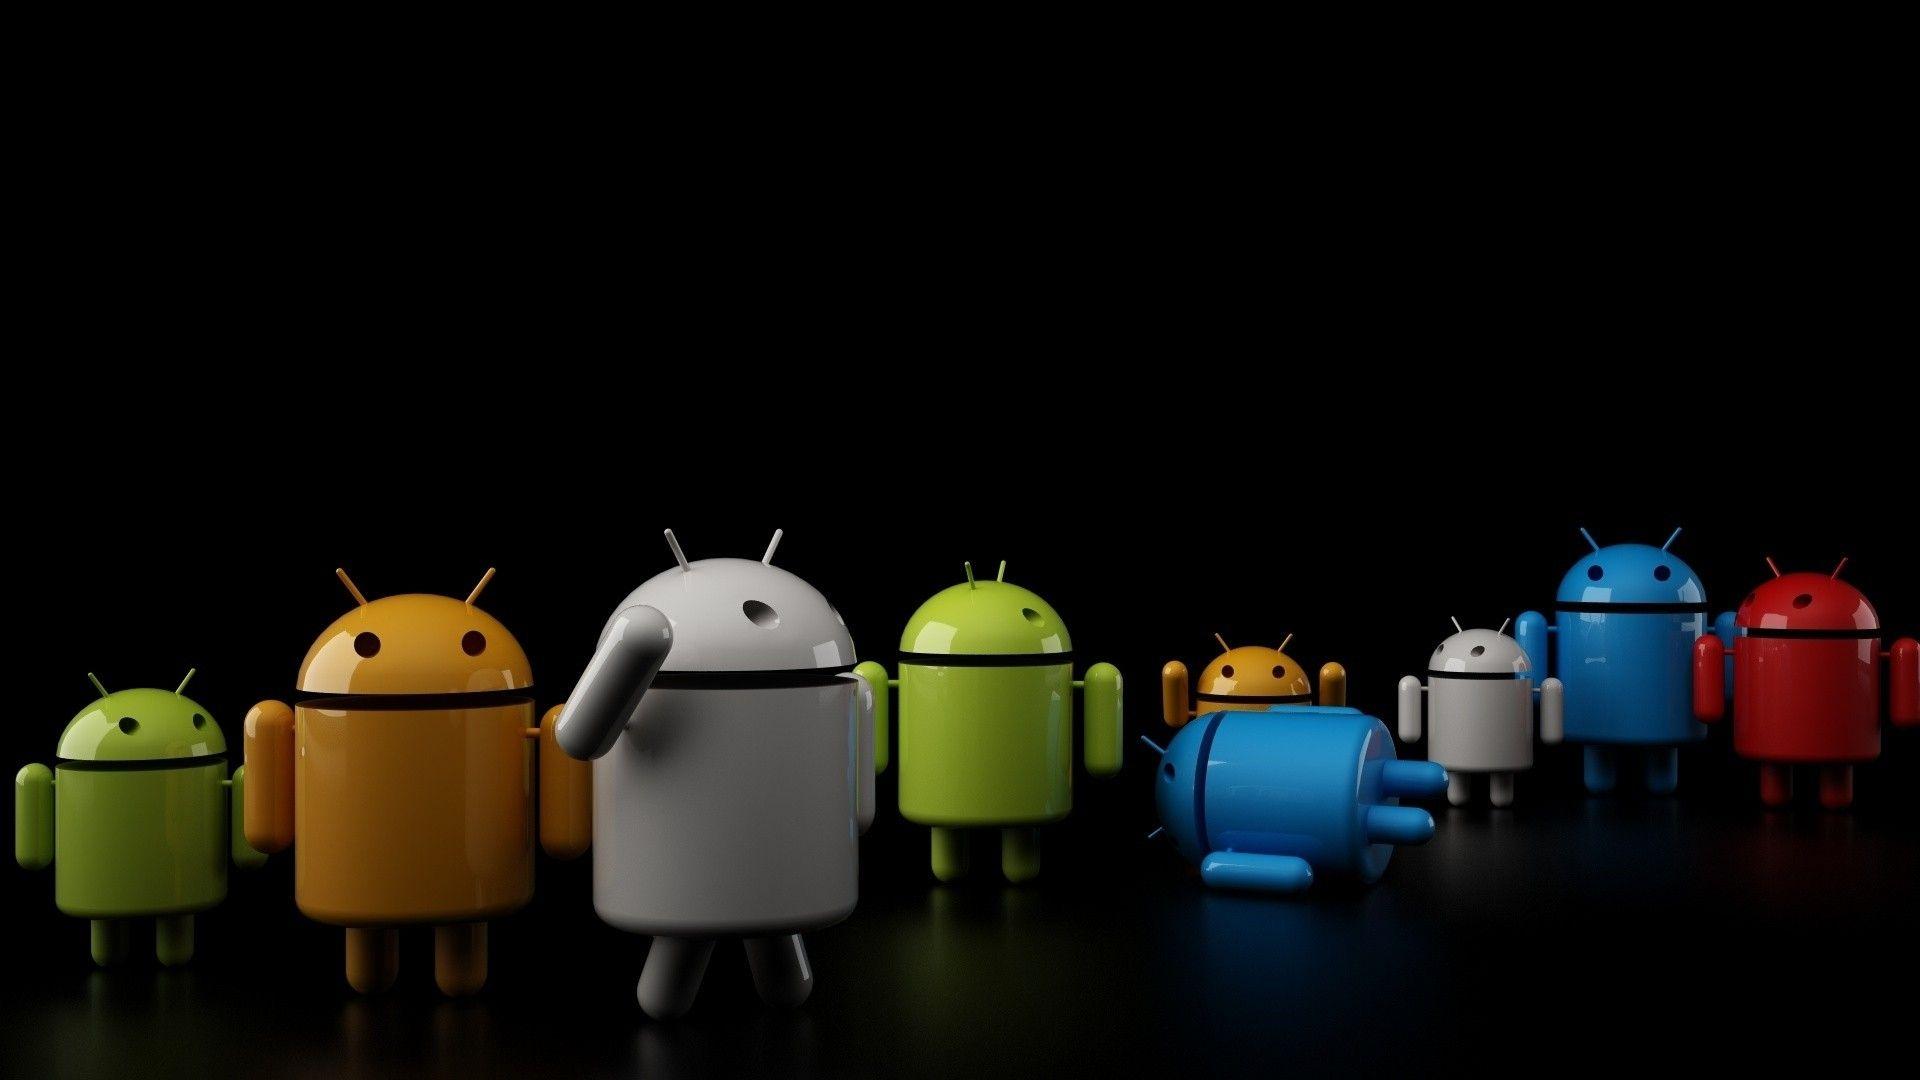 High Tech Colorful Android Robots Wallpaper Wallpaper